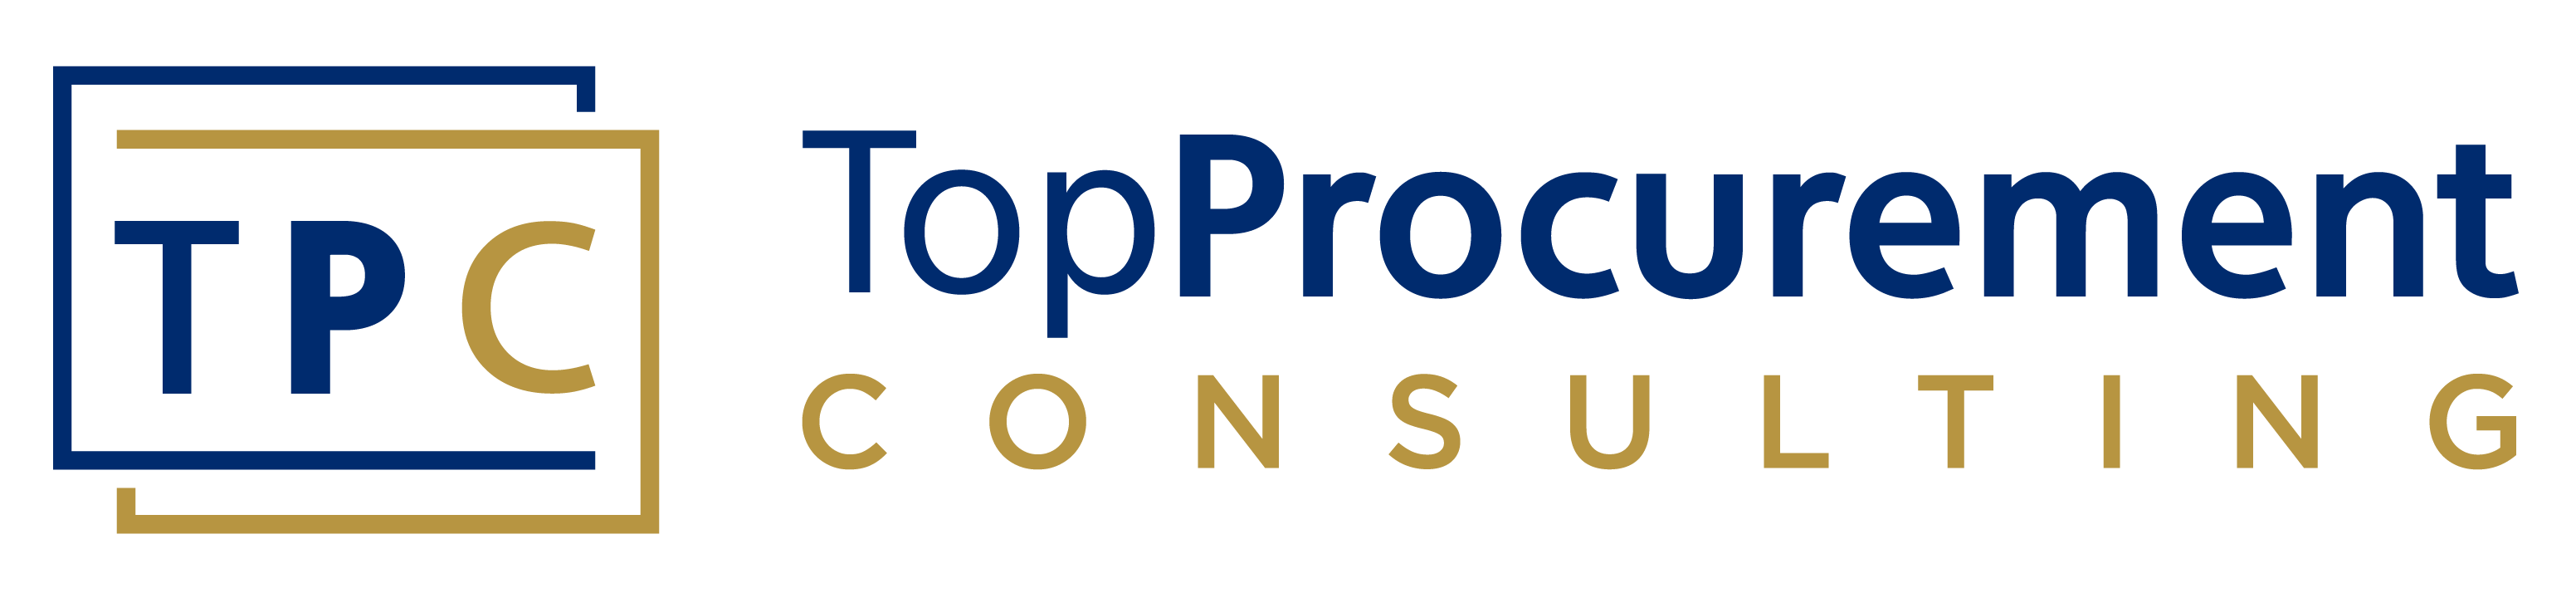 TopProcurement Consulting